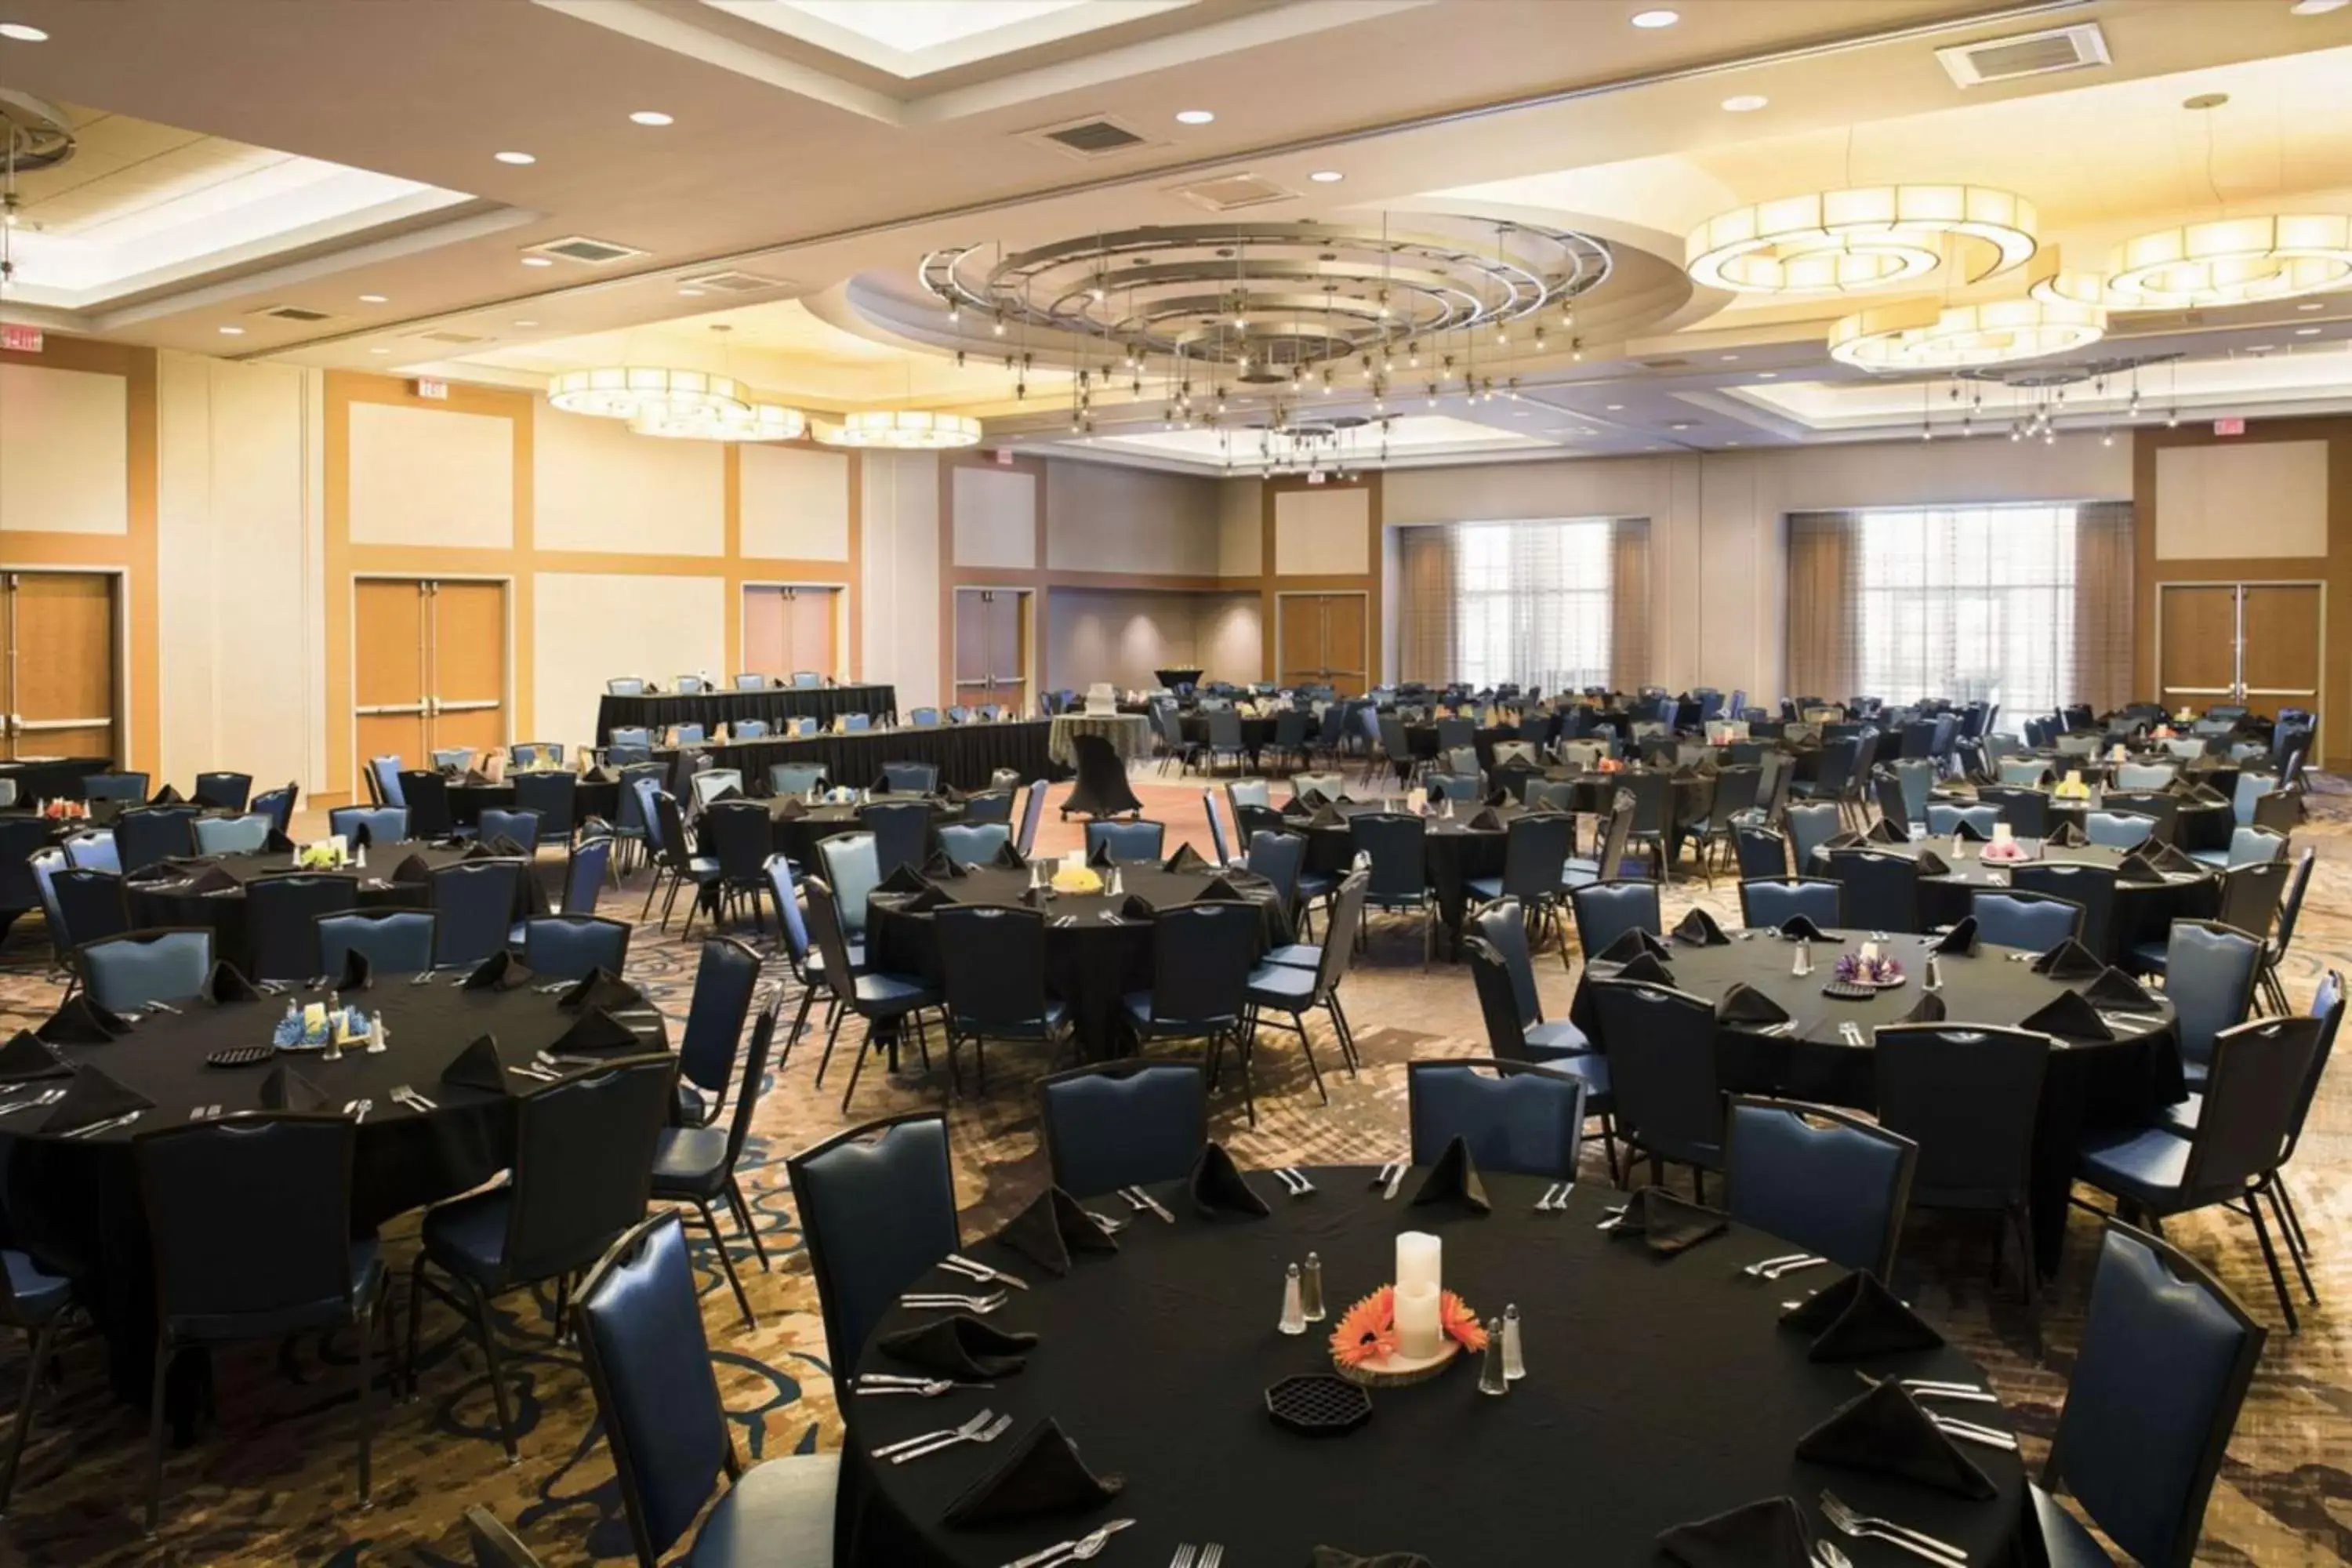 Meeting/conference room, Banquet Facilities in Hilton Garden Inn Sioux Falls Downtown